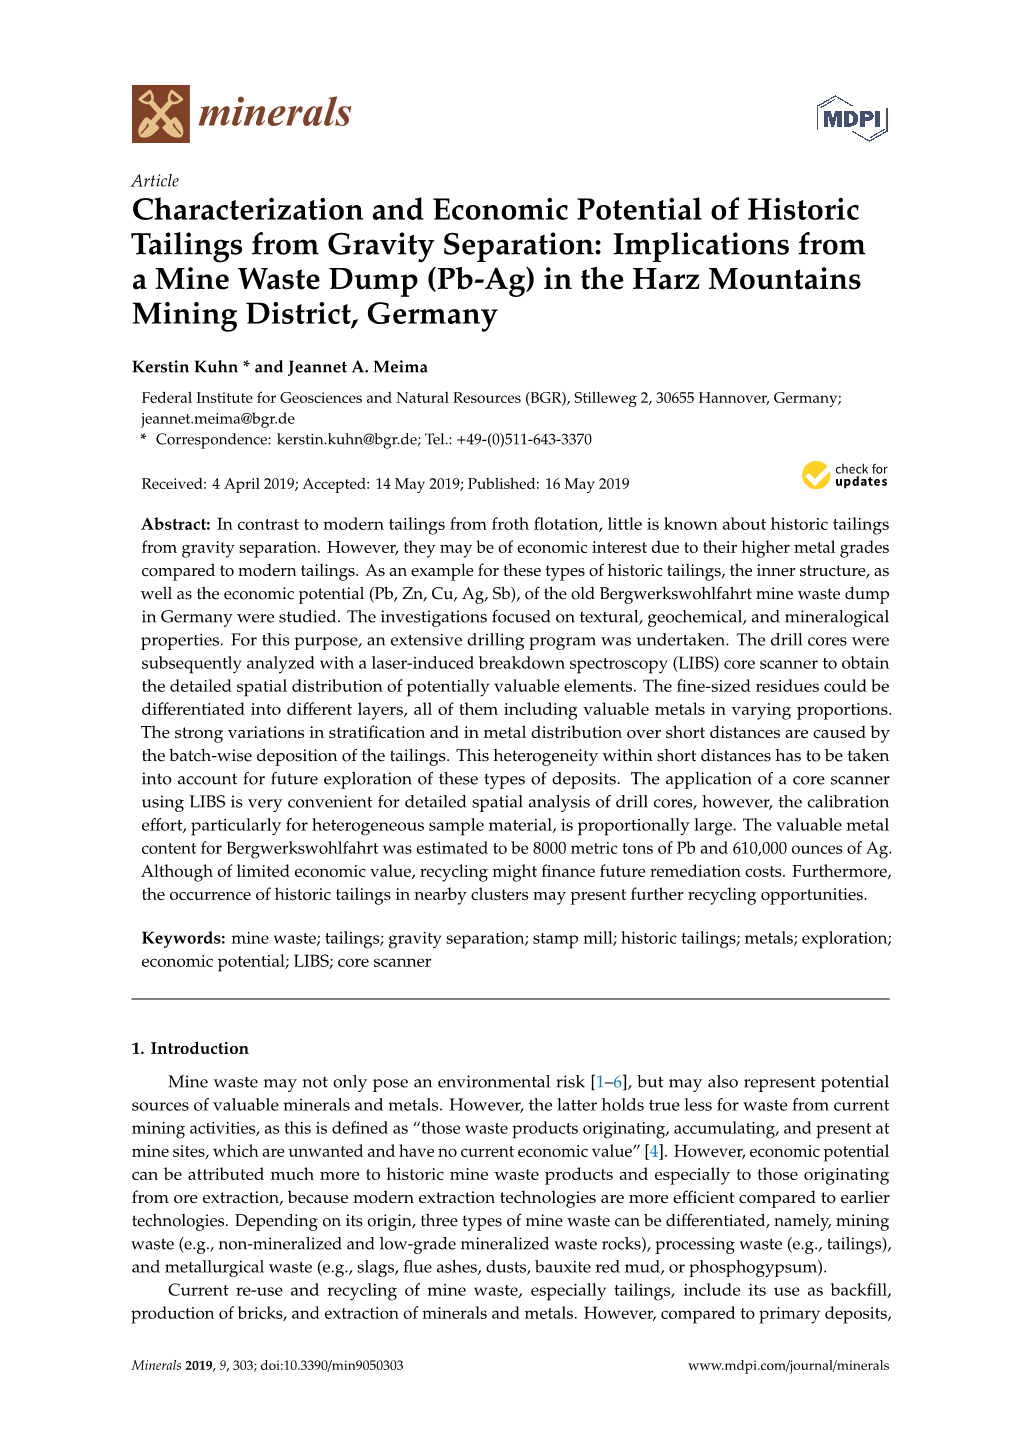 Characterization and Economic Potential of Historic Tailings From